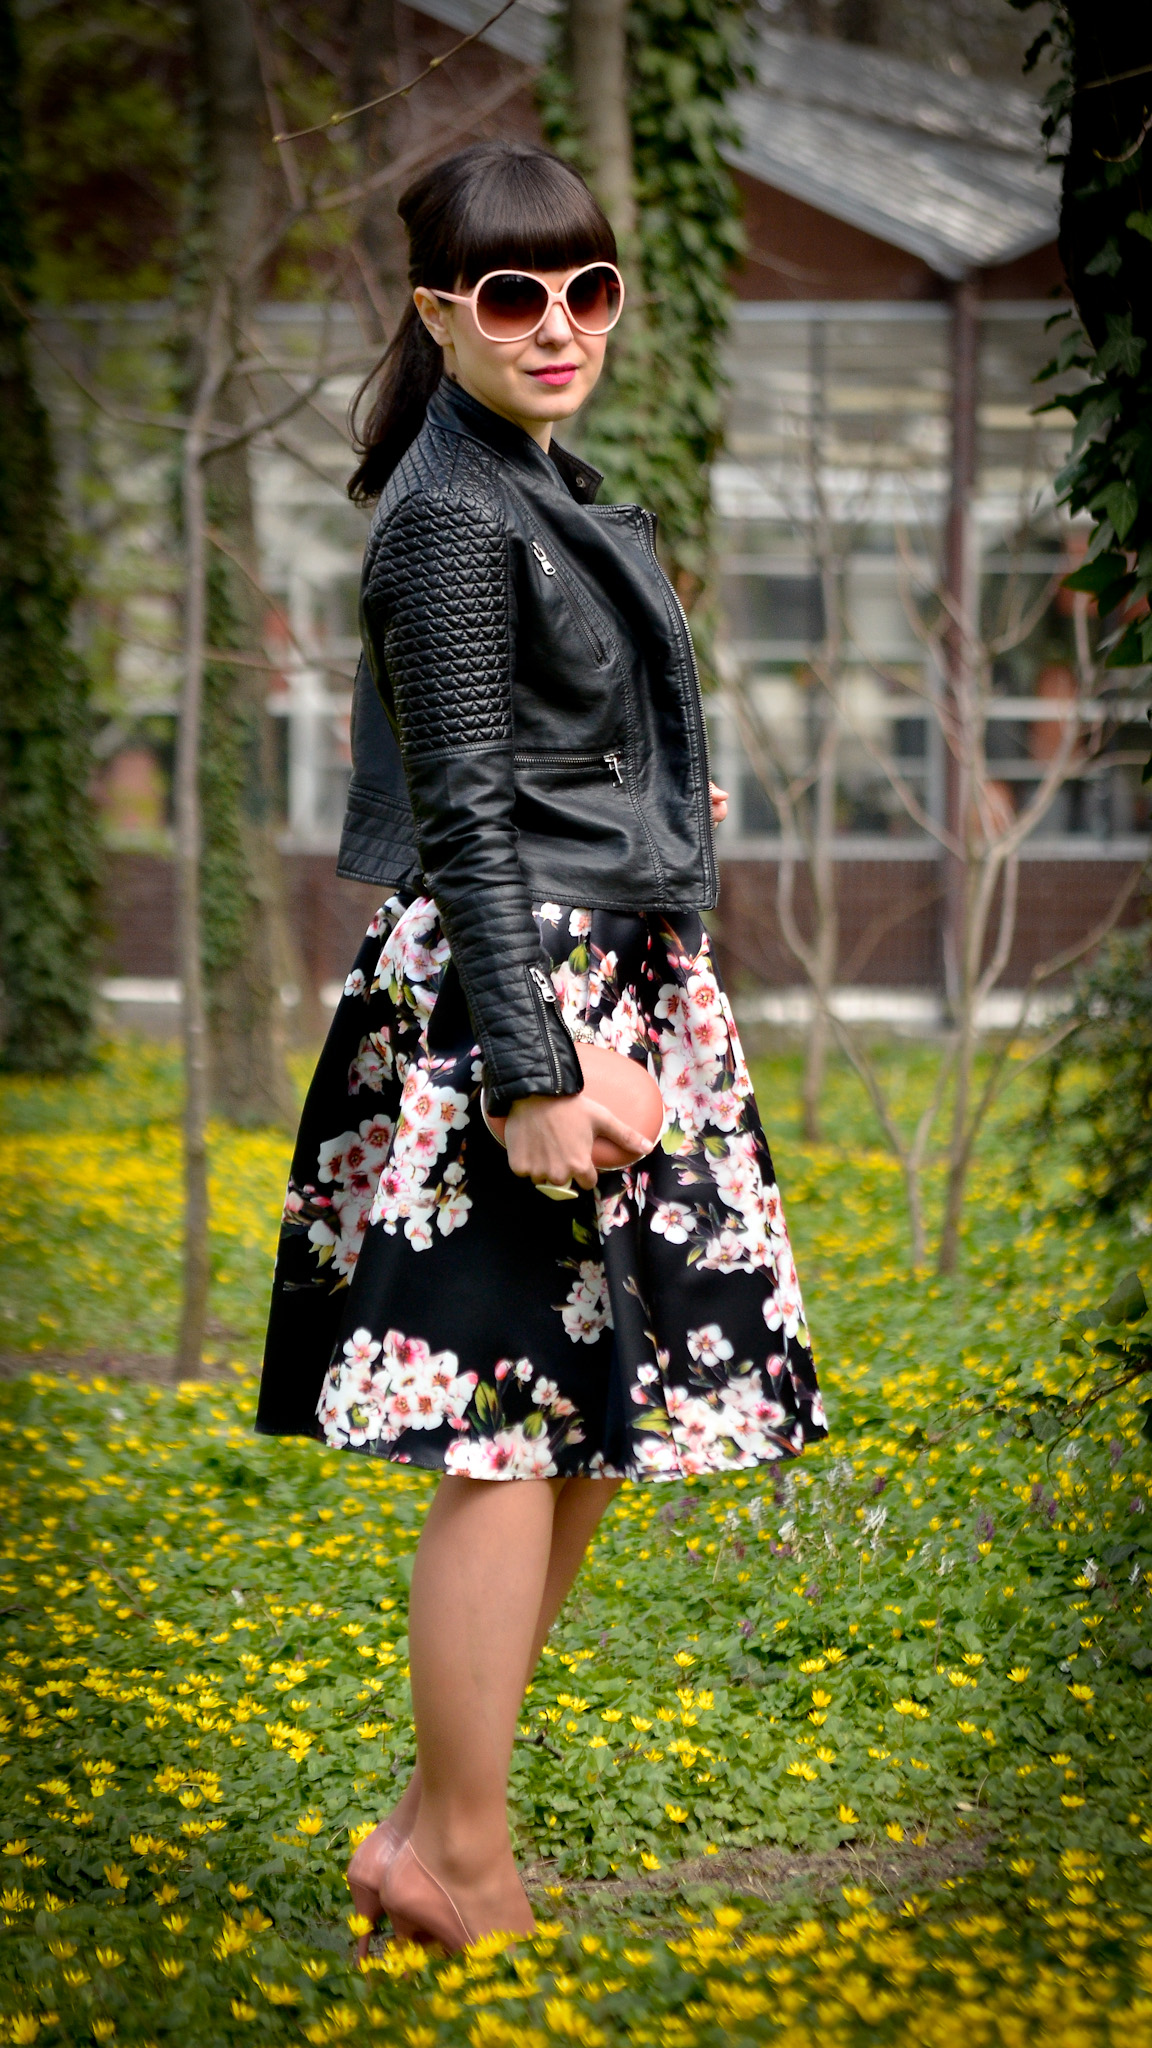 blooming skirt sheinside cherry flowers 50s style coral clutch heels leather jacket pink sunglasses spring lace crop top zara